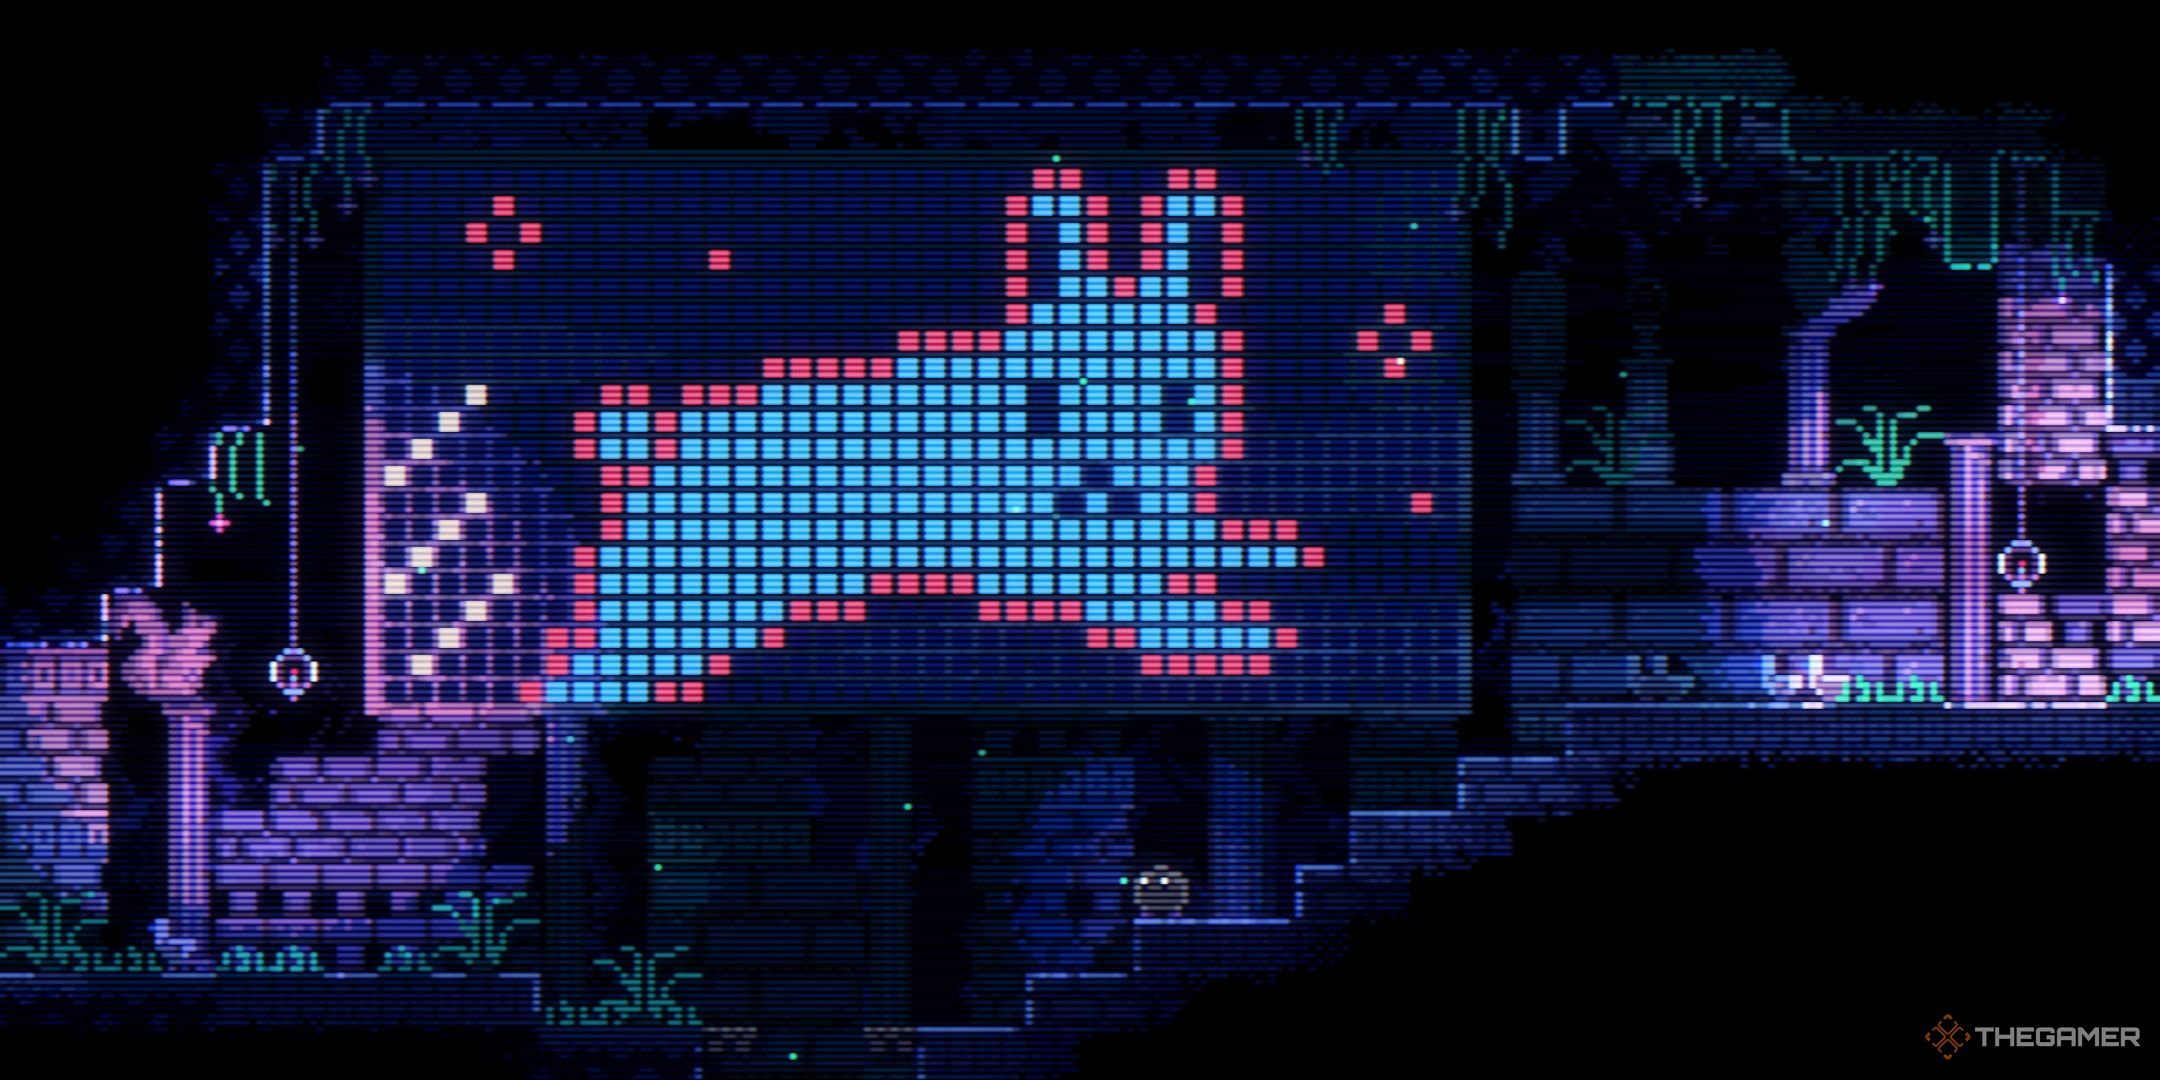 The player character looking at the bunny mural in Animal World.